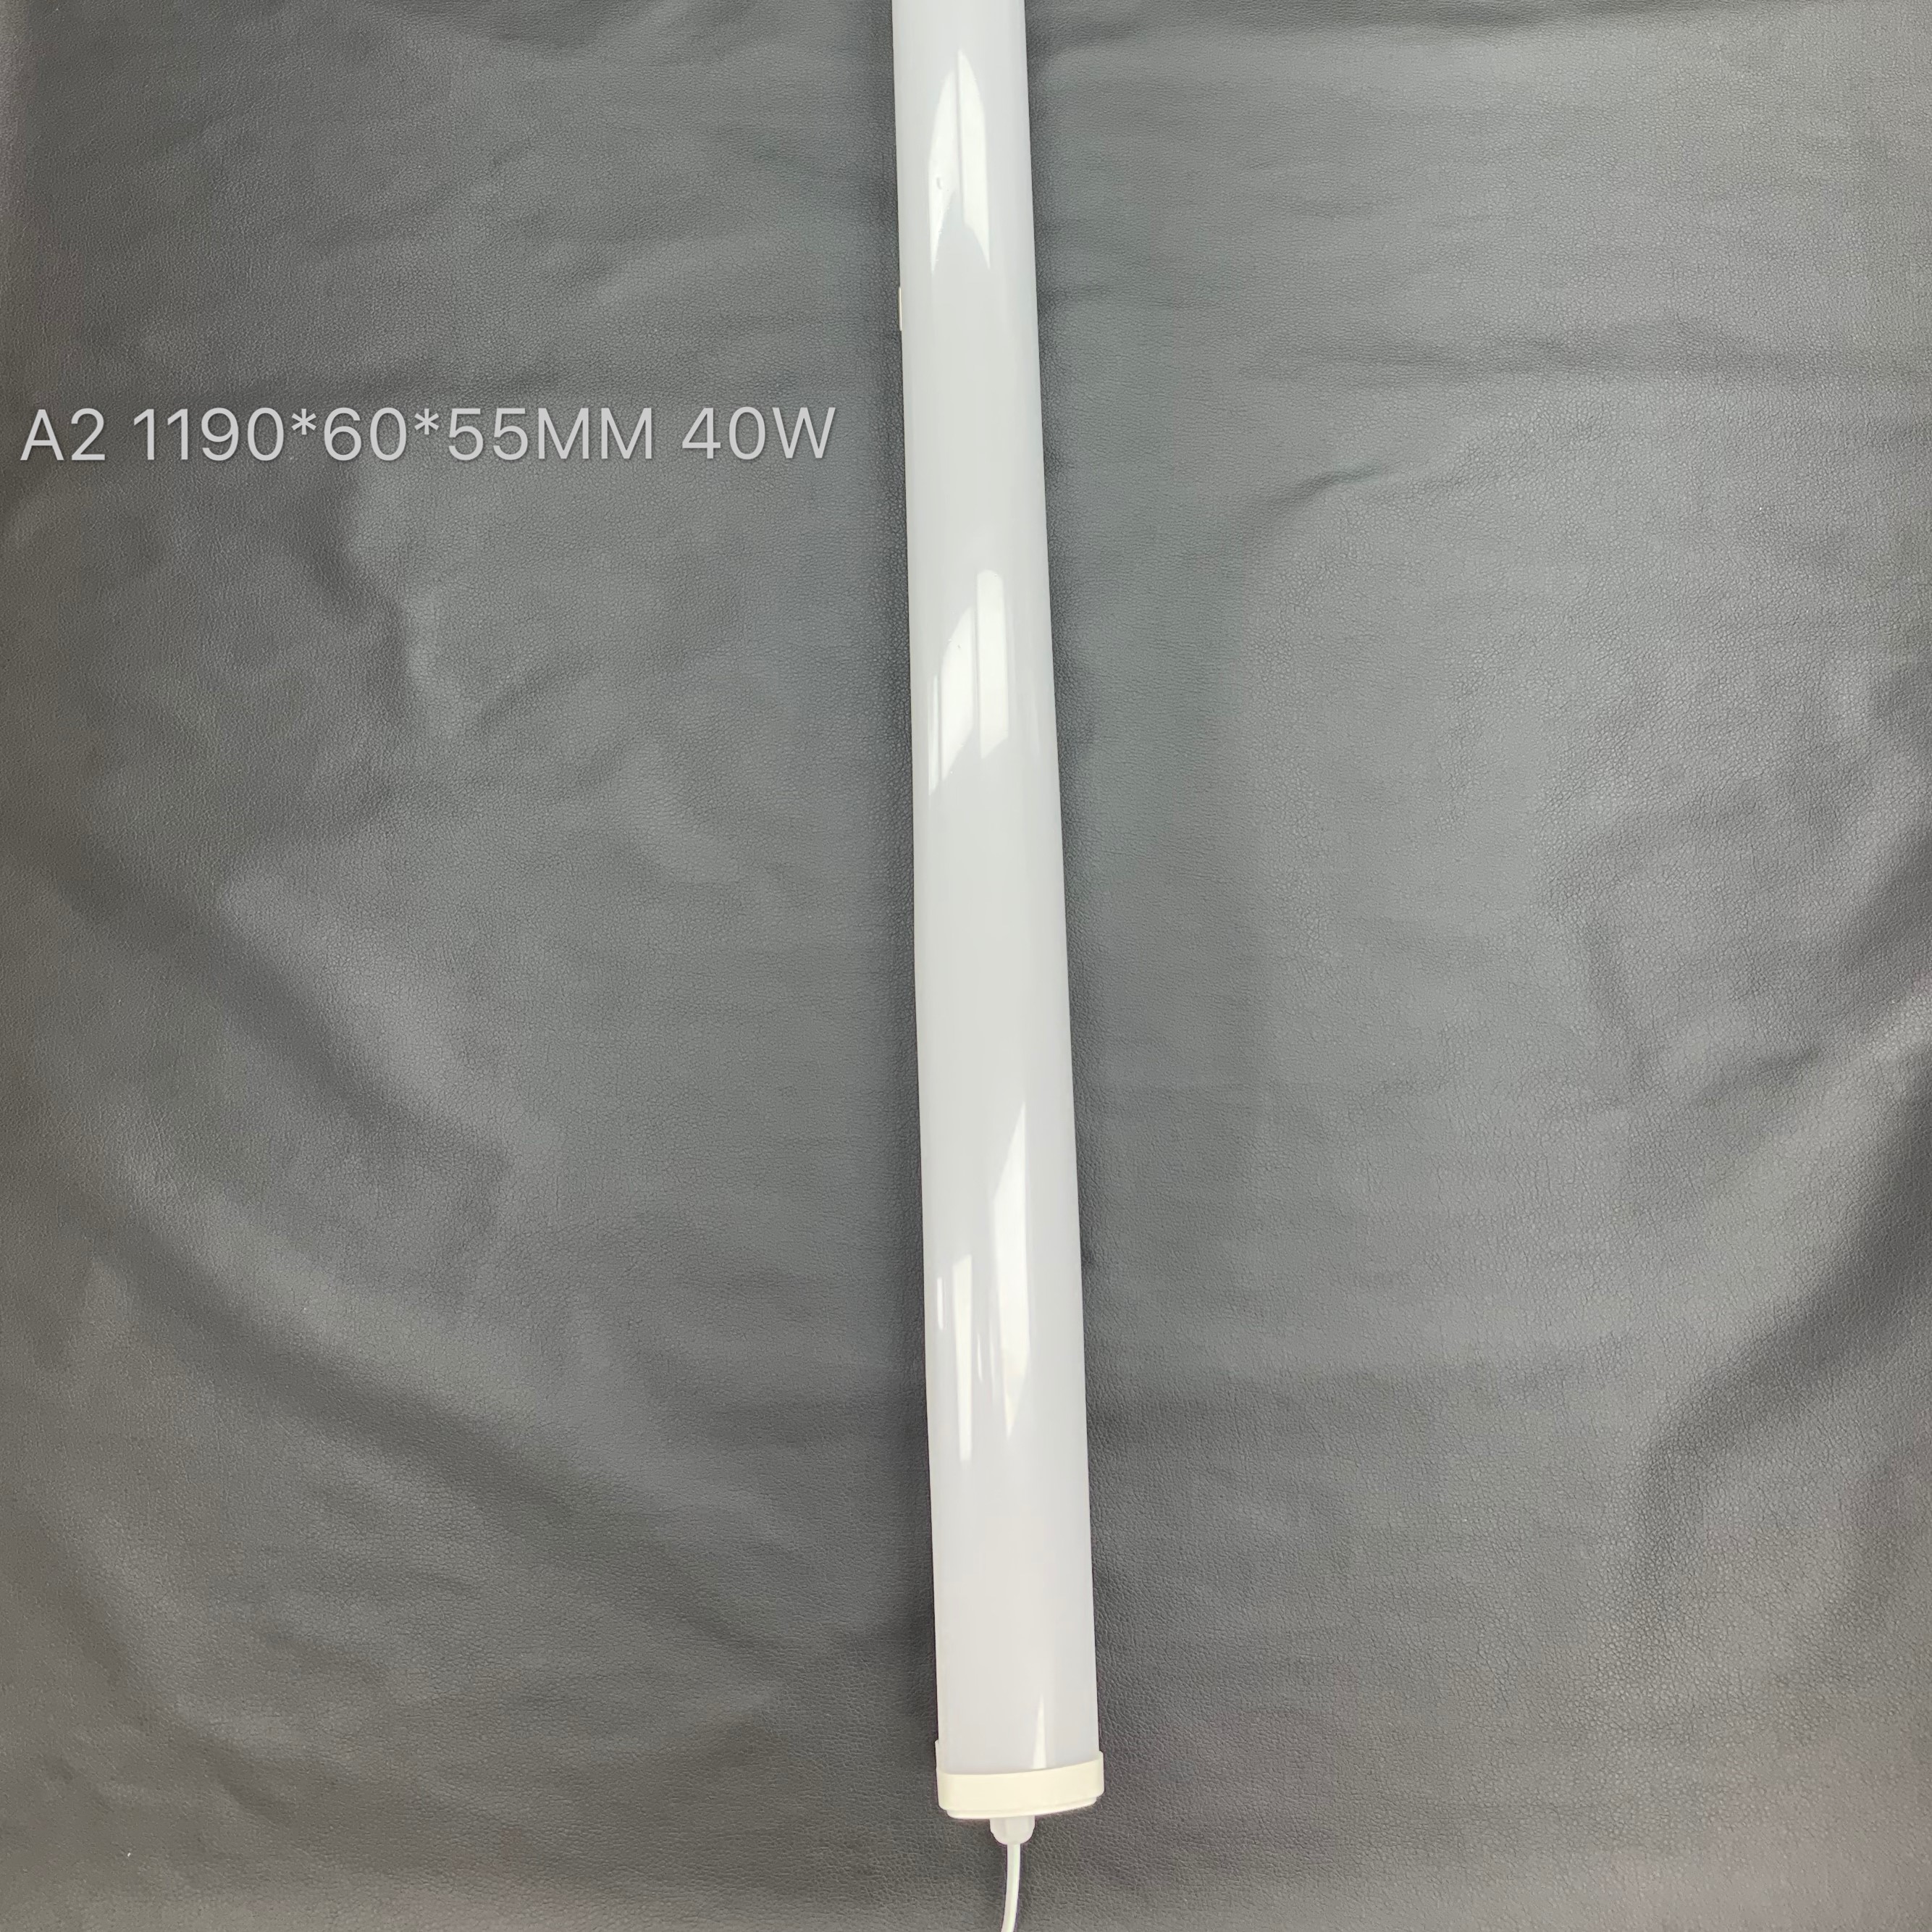 Indoor bright integrated long 40W energy saving lamp tube